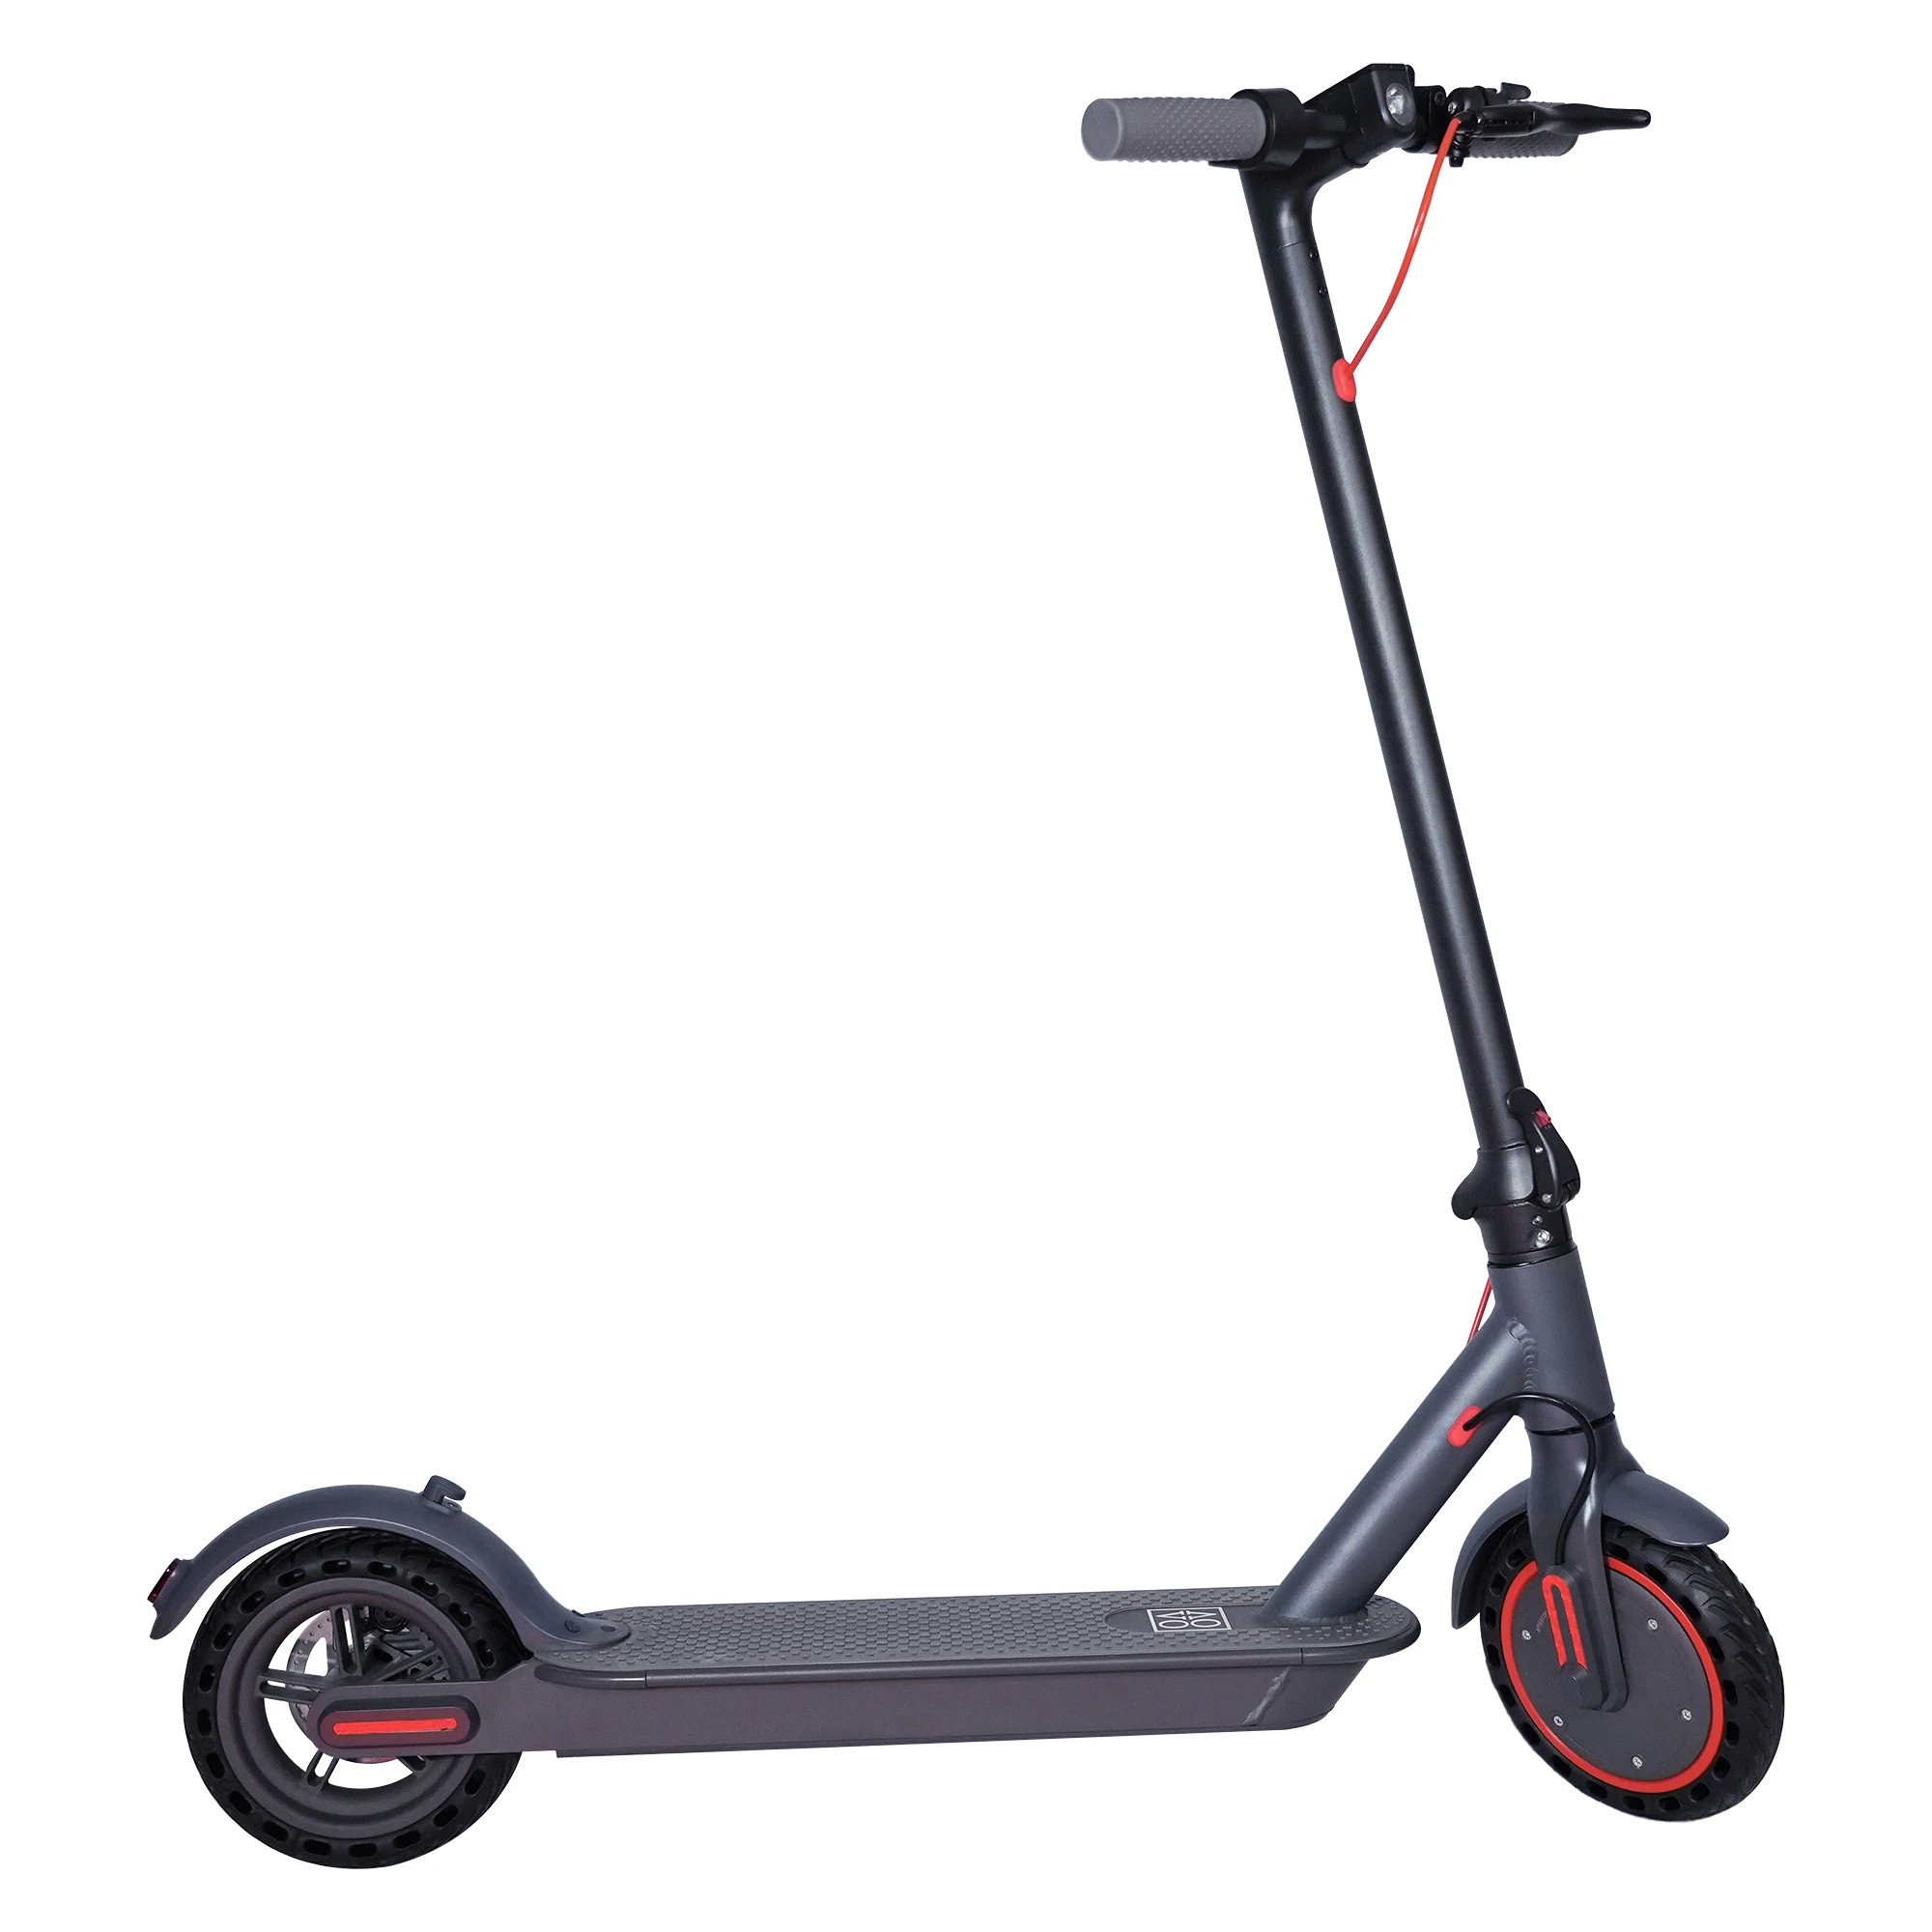 

AOVO US Europe Stock Drop Shipping Newest scoter electric scooter 10.5AH 35km Range 2 Wheel self-balancing electric scooters, Dark grey, white